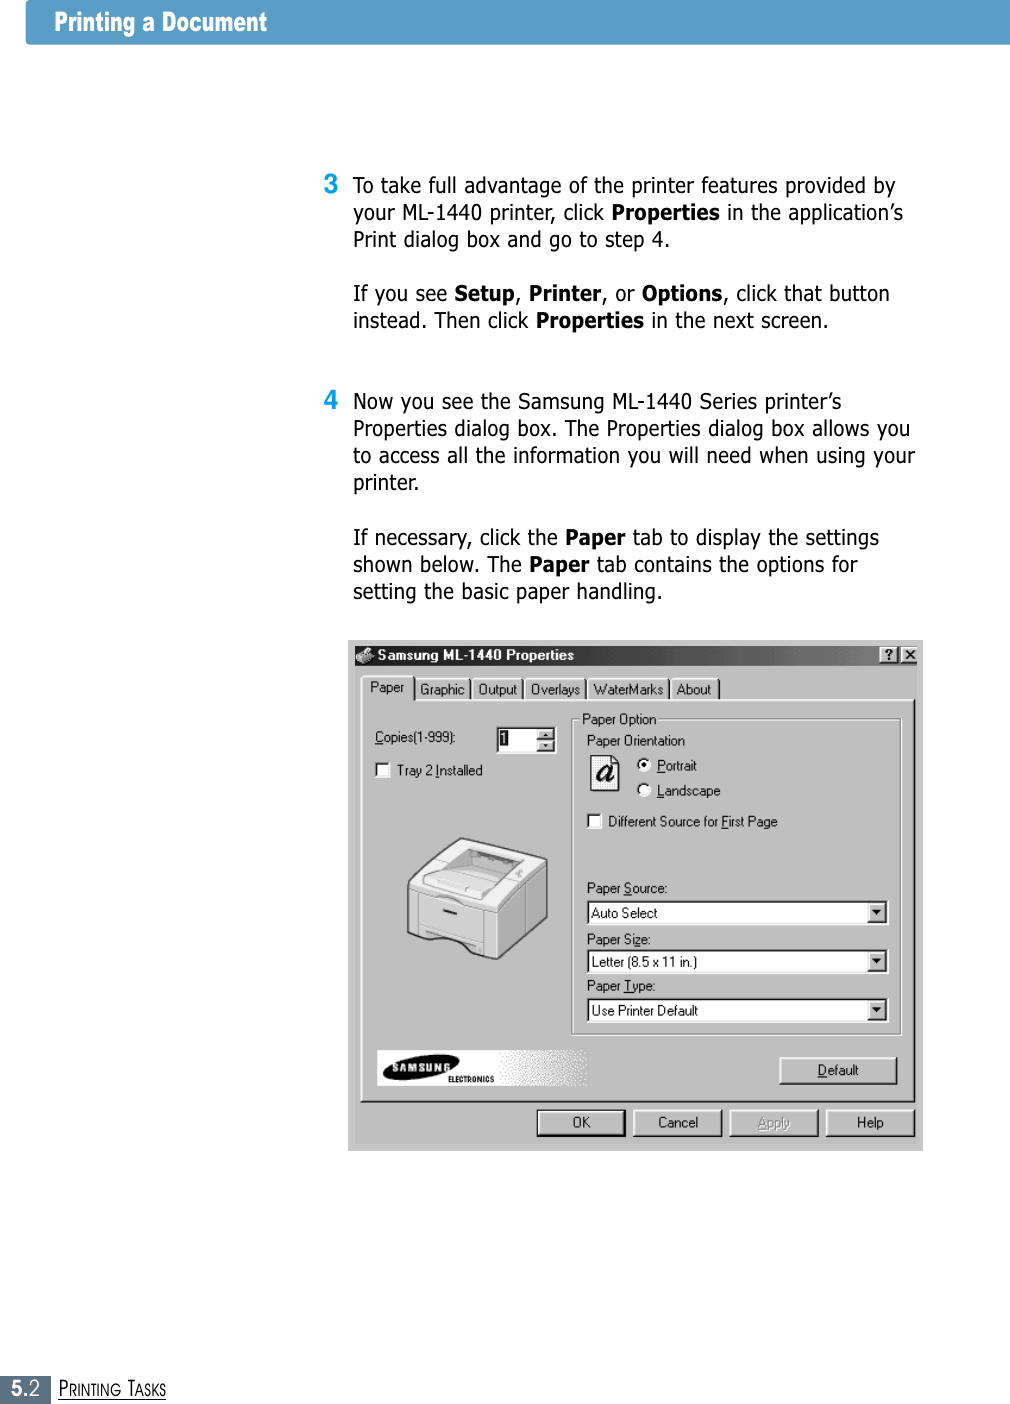 5.2PRINTING TASKSPrinting a Document3To take full advantage of the printer features provided byyour ML-1440 printer, click Properties in the application’sPrint dialog box and go to step 4. If you see Setup, Printer, or Options, click that buttoninstead. Then click Properties in the next screen.4Now you see the Samsung ML-1440 Series printer’sProperties dialog box. The Properties dialog box allows youto access all the information you will need when using yourprinter.If necessary, click the Paper tab to display the settingsshown below. The Paper tab contains the options forsetting the basic paper handling.